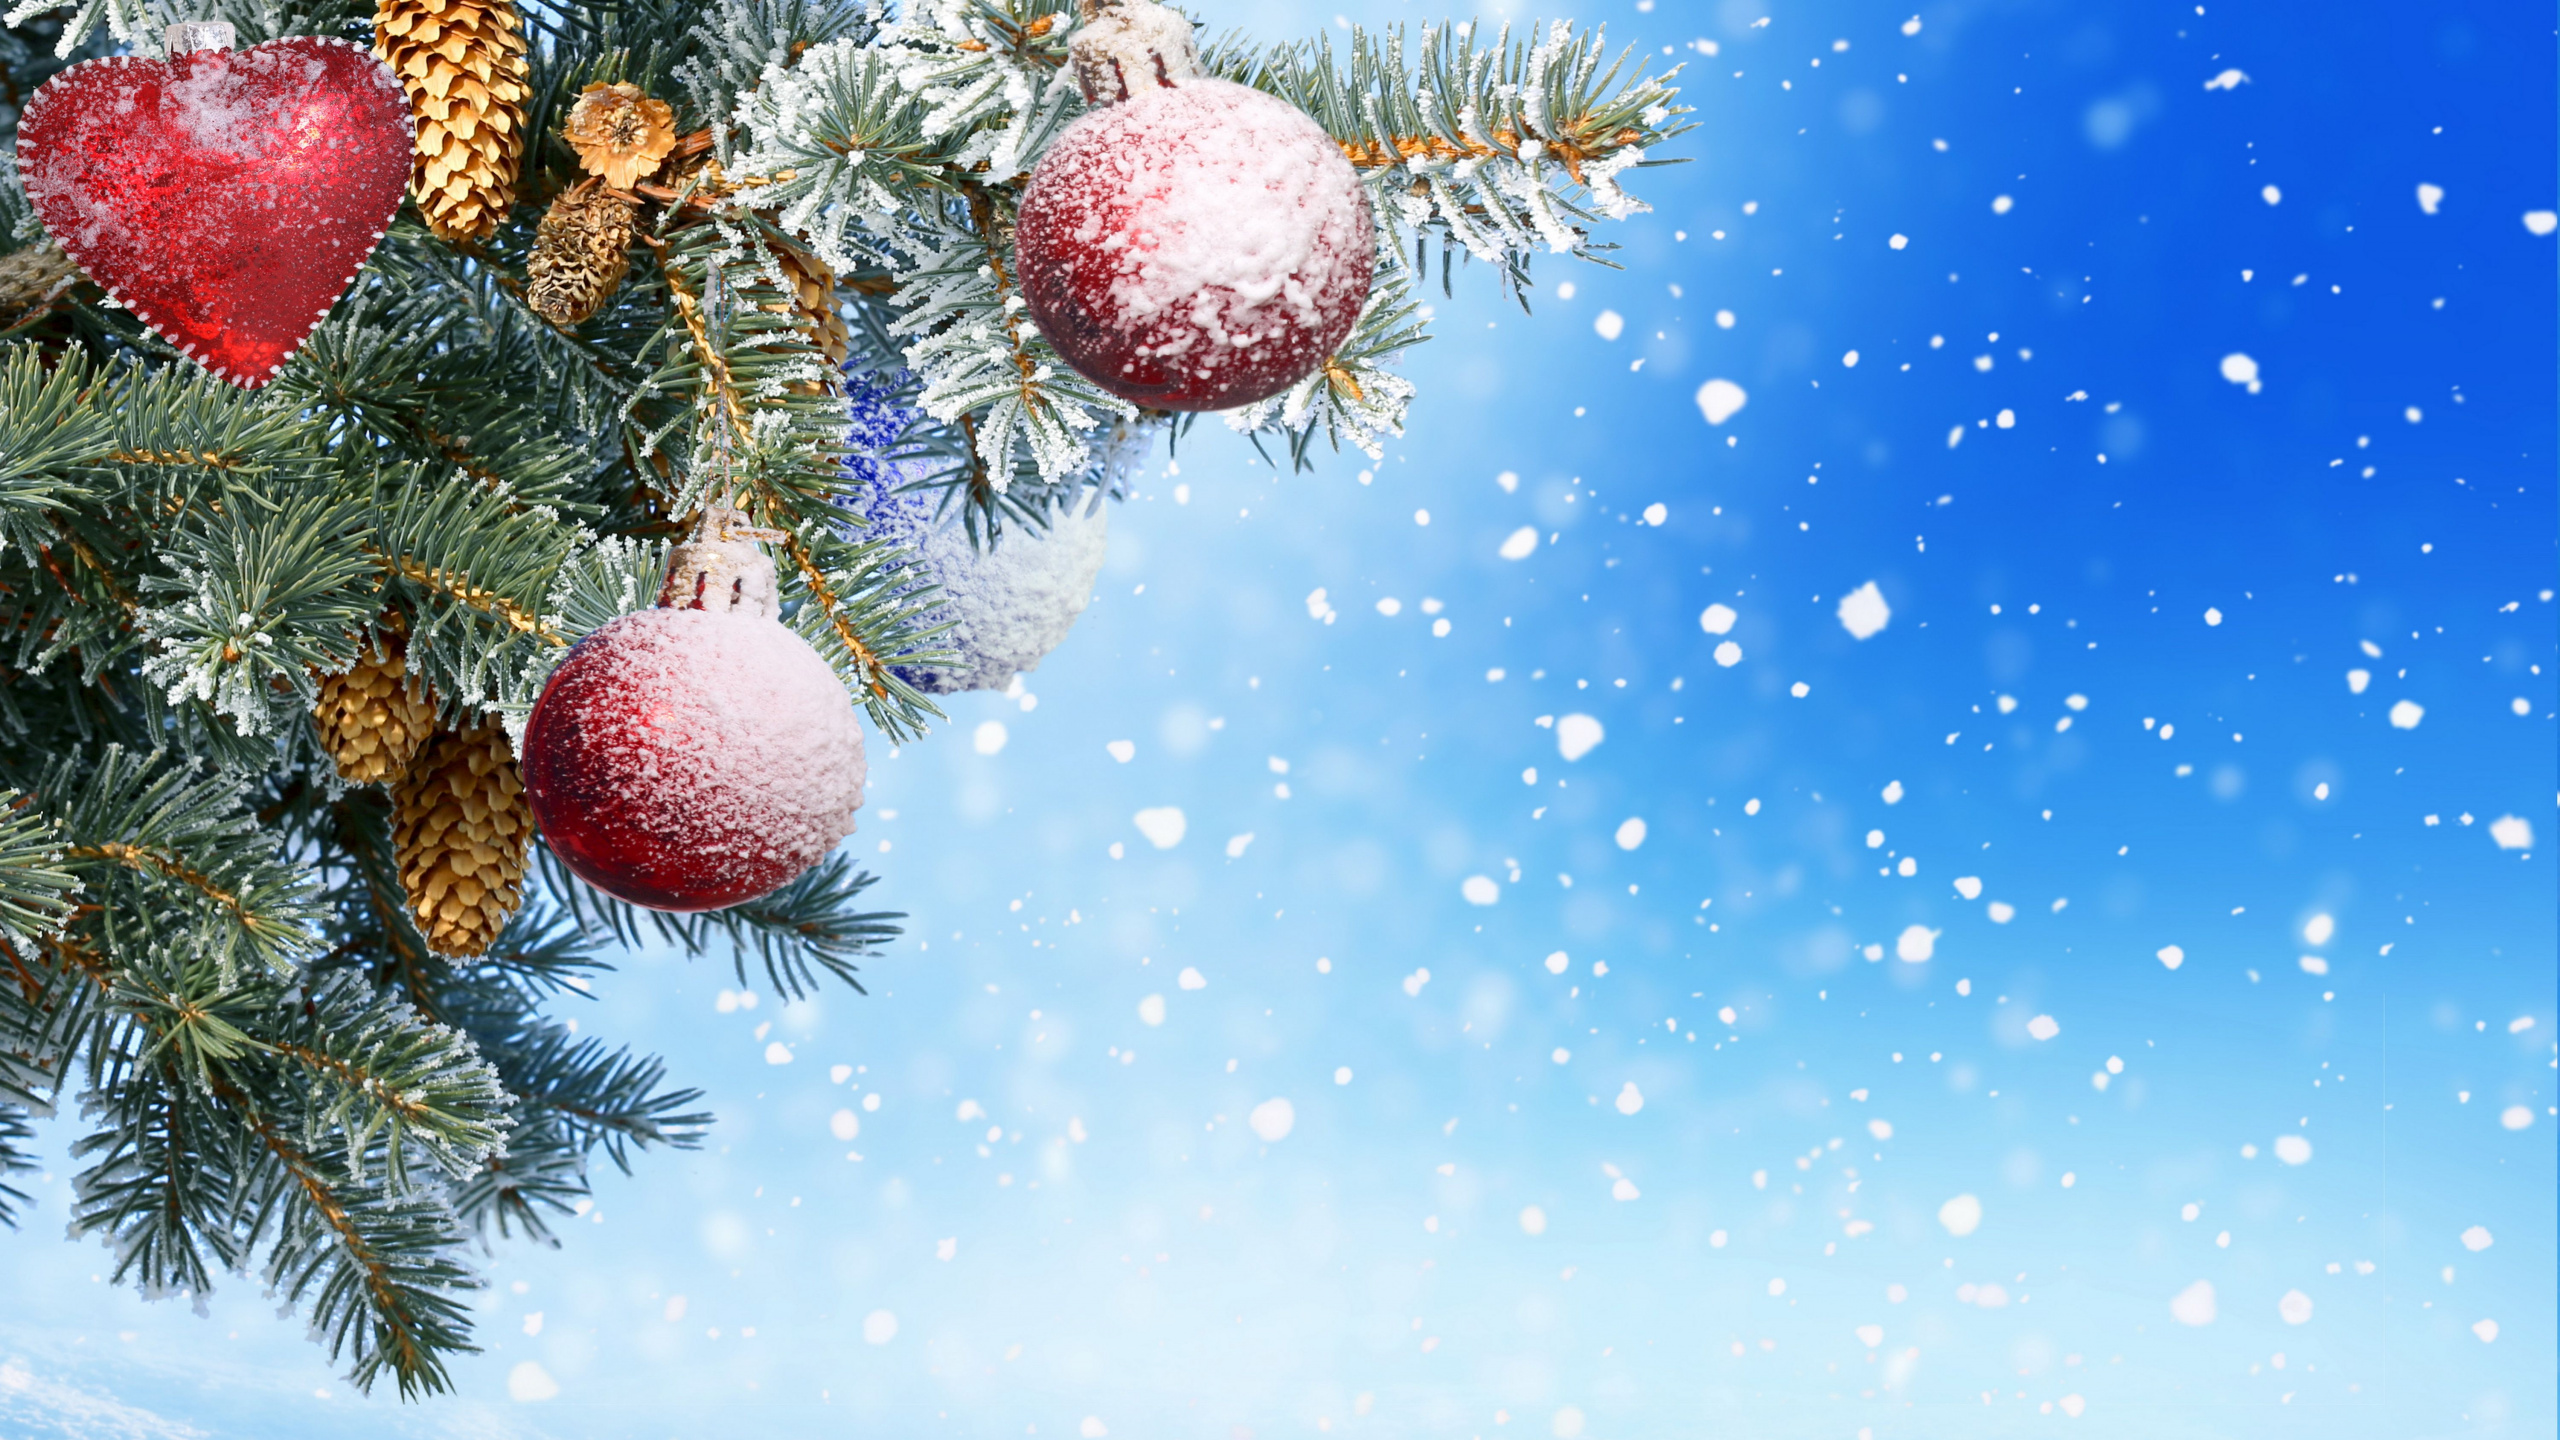 New Year, Christmas Day, Christmas Ornament, Tree, Fir. Wallpaper in 2560x1440 Resolution